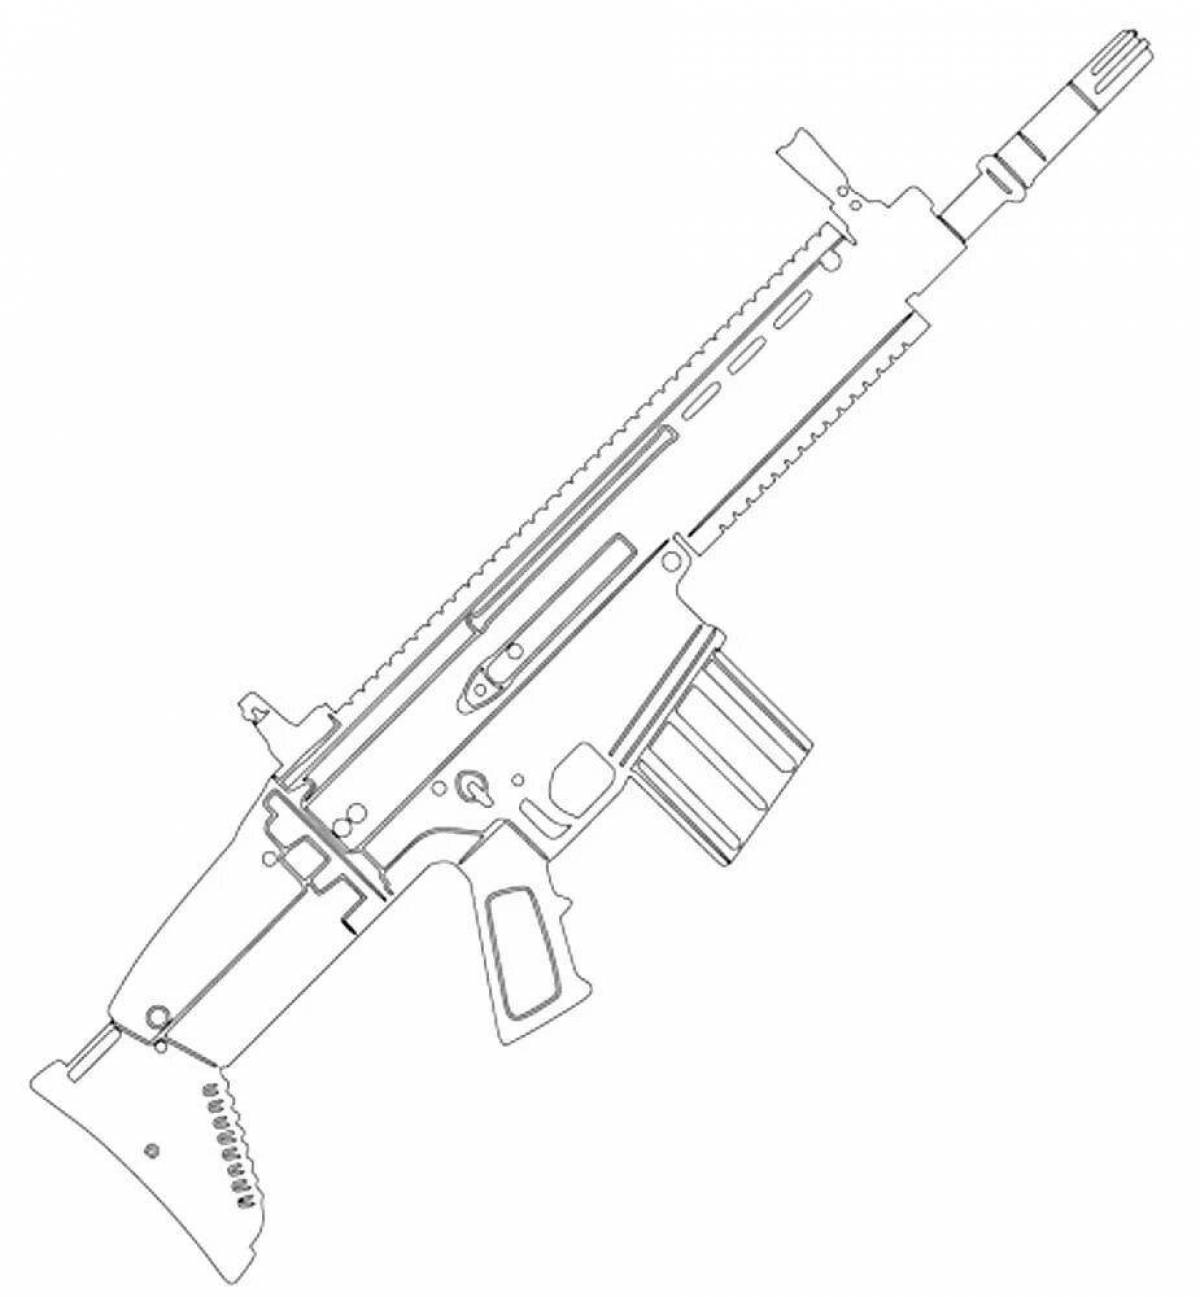 Attractive coloring pages with guns for boys